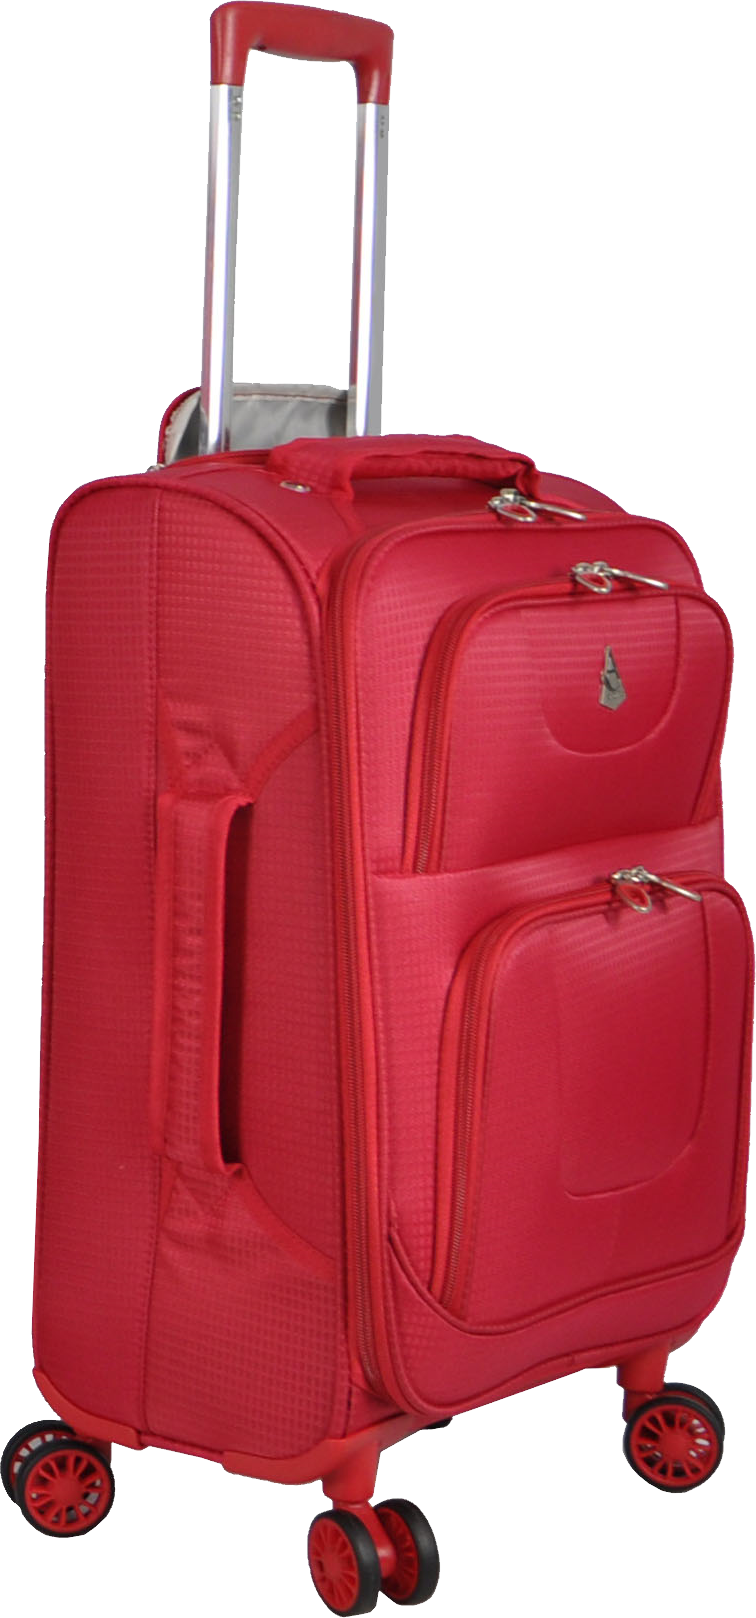 A Red Suitcase With A Handle